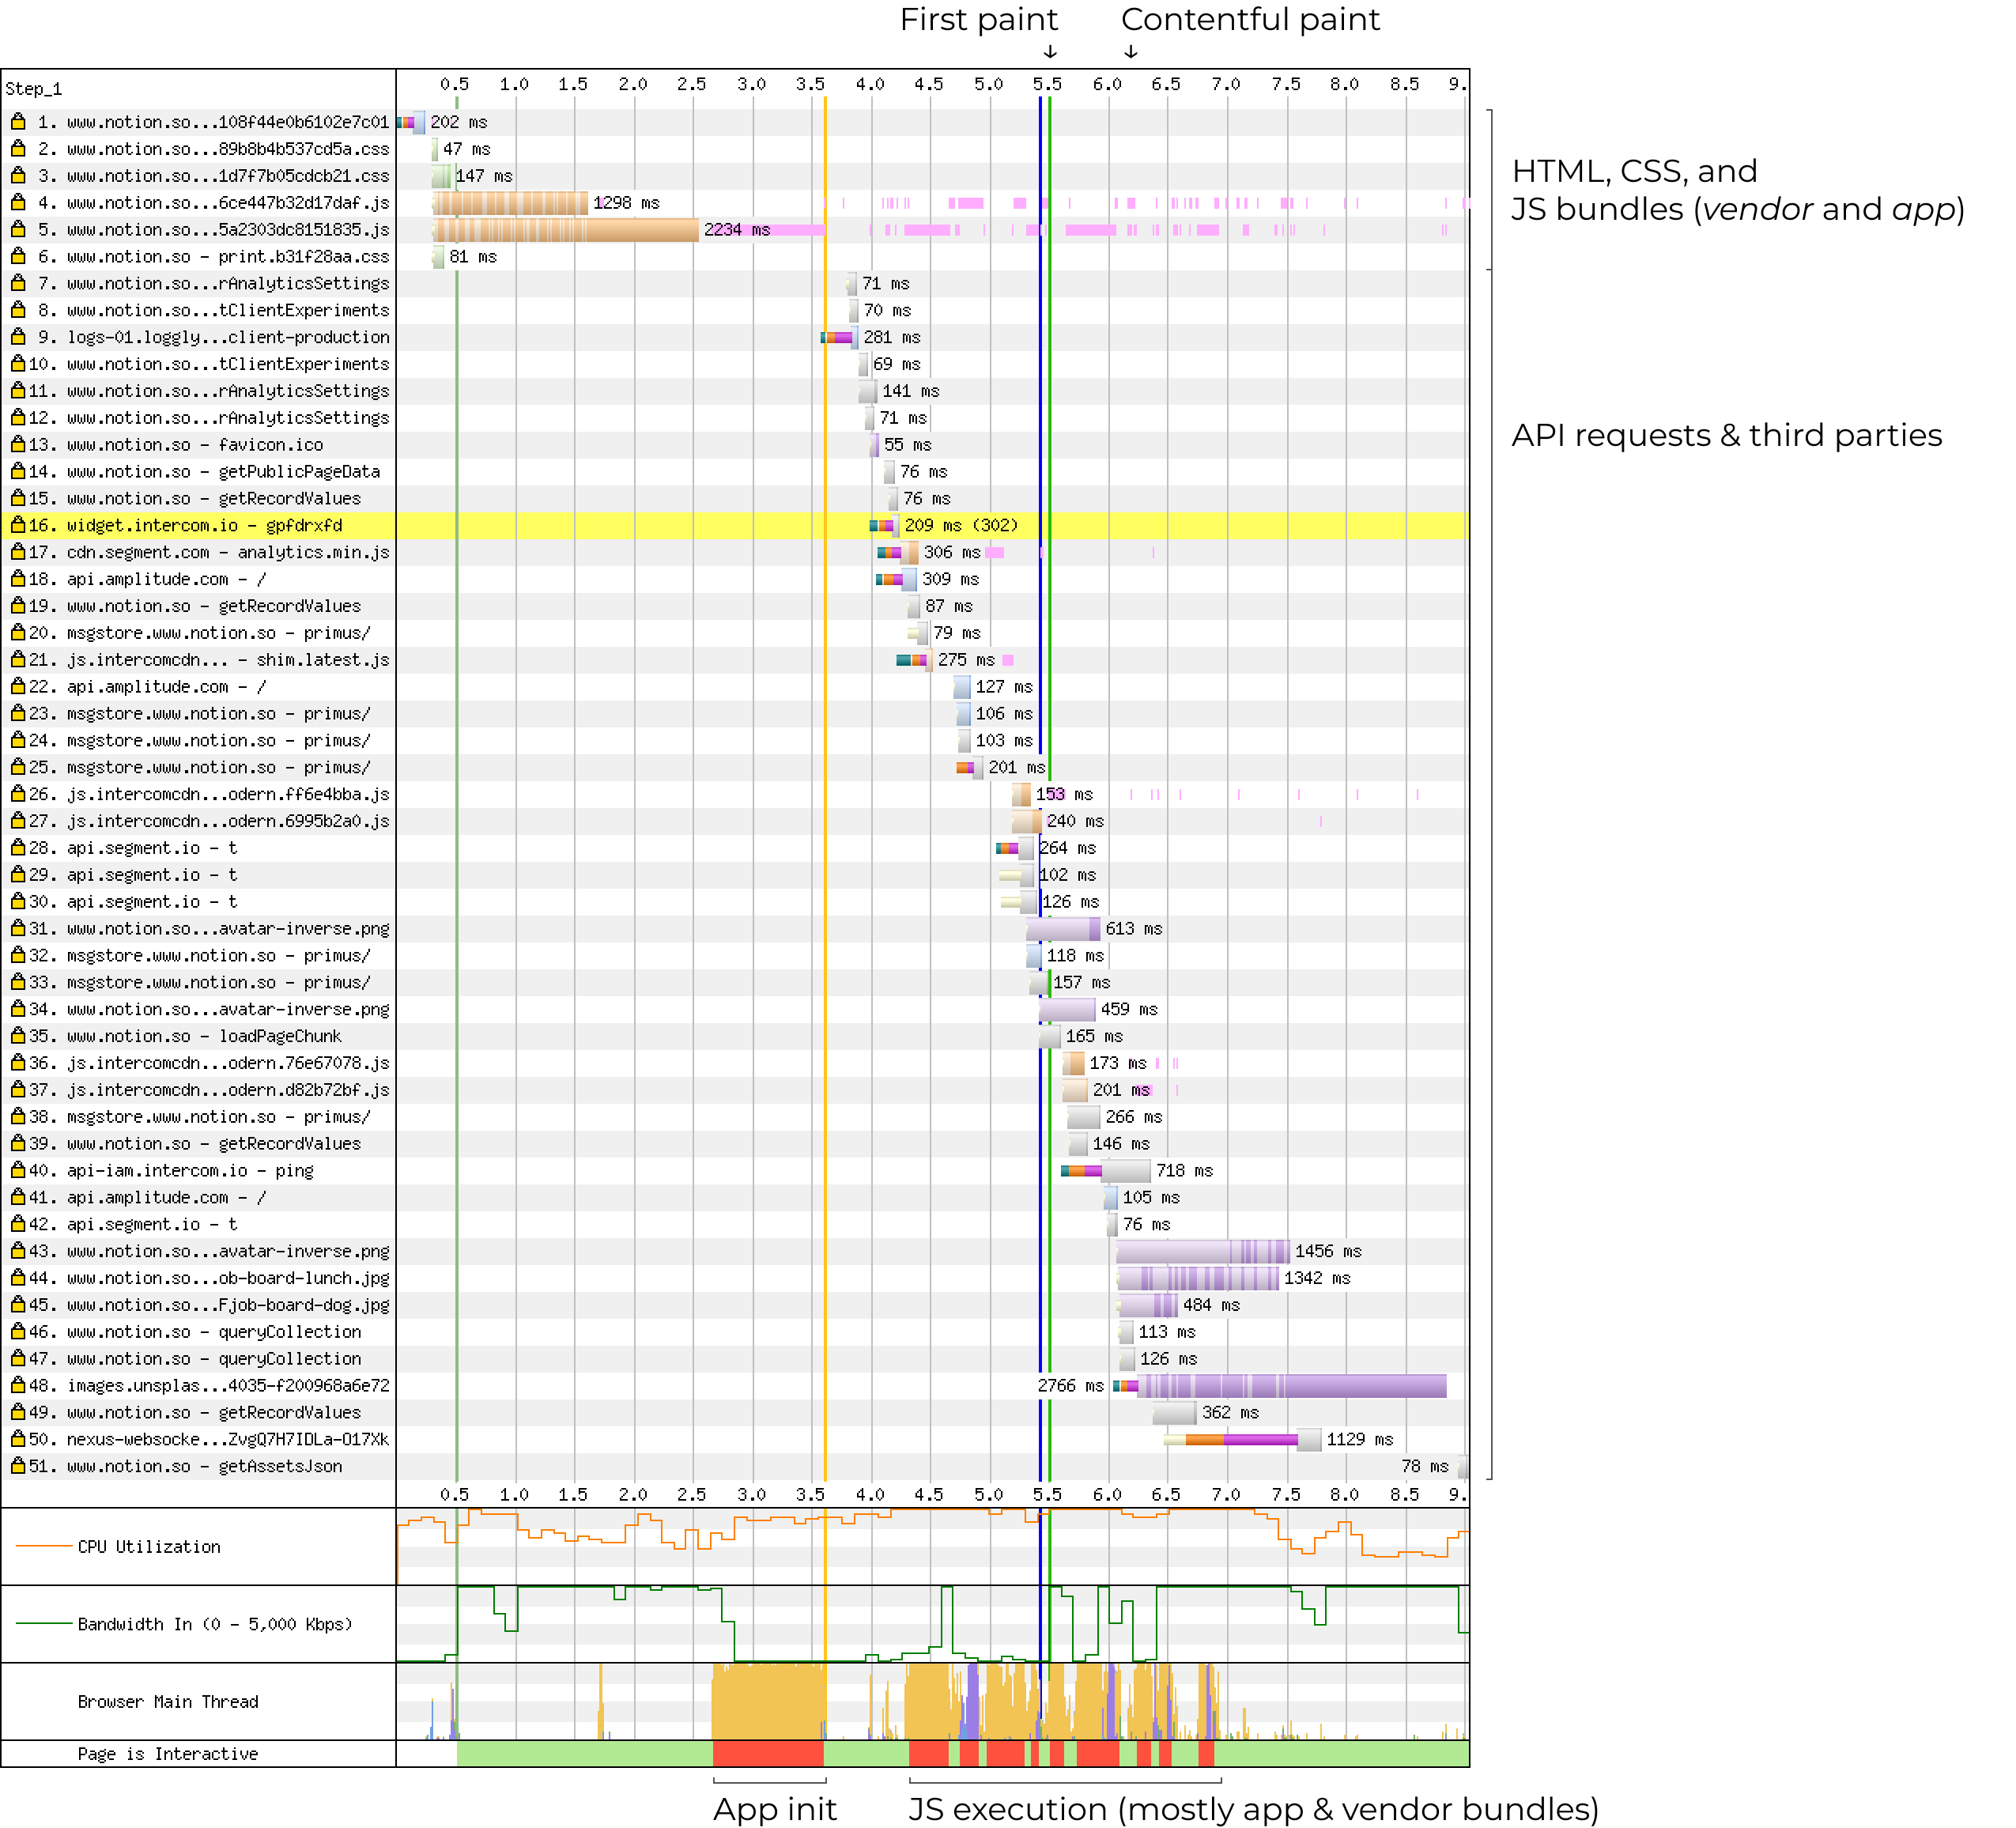 https://3perf.com/static/875c8bbd7a5a05190b50c9dffabecdfb/ffcbe/waterfall-explained-full.png